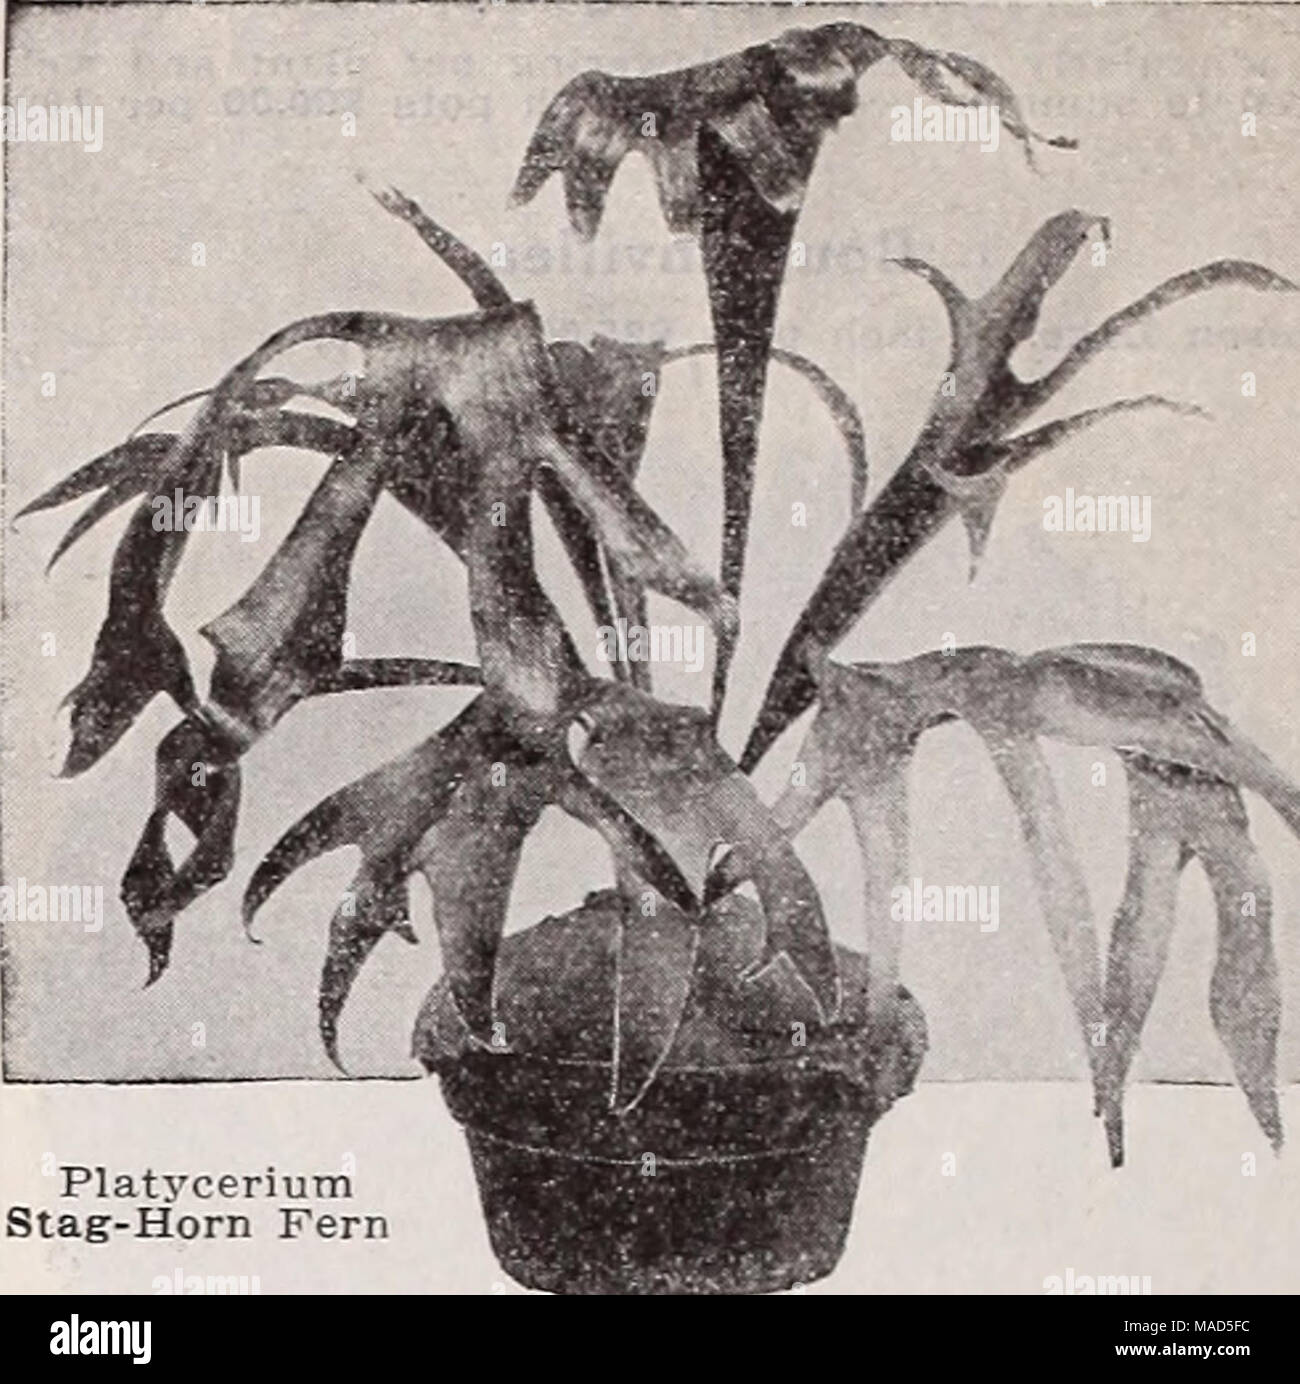 . Dreer's wholesale catalog for florists : winter spring summer 1937 . Platycerium Stag-Horn Fern Platycerium—Stag-Horn Fern The Stag-Horn Ferns are now being recognized as desirable plants for store and home decoration. Alcicorne. A showy variety with long, narrow leaves of a striking grayish-green color. 6-inch pots $2.50 each. Grande. 6-inch pot plants $5.00 each. Polystichum coriaceum—The Baker Fern Excellent for cut fronds and one of the best for bas- kets, etc. li^-inch pots, readv June, $8.00 per 100; $75.00 per 1000. 3-inch pots $3.00 per doz.; $20.00 per 100. Four-Inch Pot Ferns For t Stock Photo